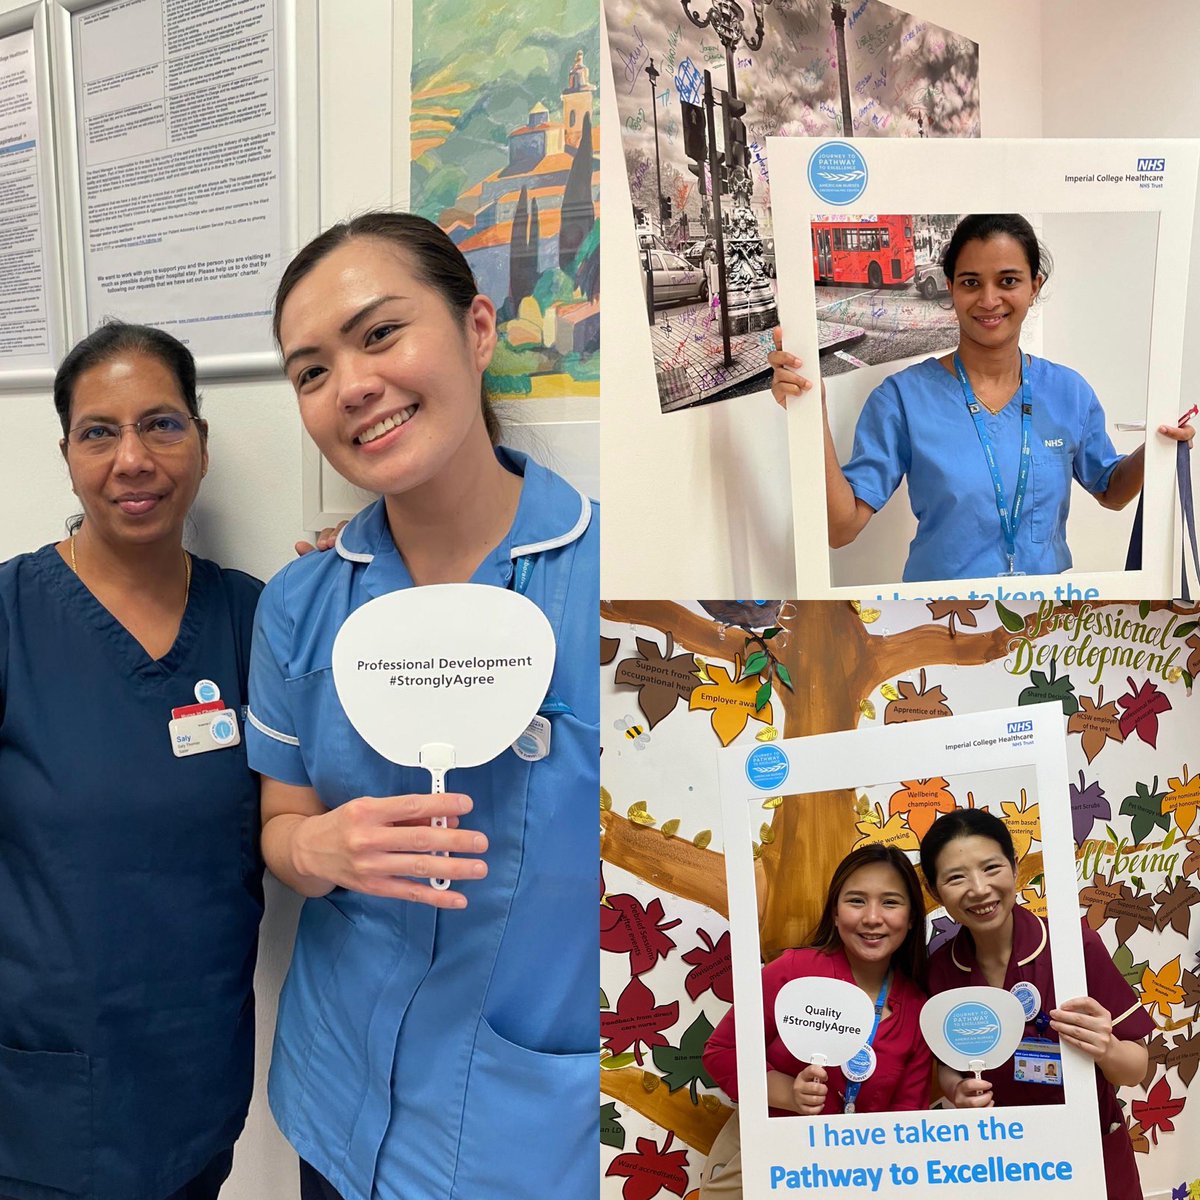 First week down, huge thanks to our dedicated nurses! 🙌 Excited to provide even more support moving forward. Starting next week, the survey will be available exclusively in the hub, Mon-Fri 9-5. Let's keep excelling together! @SigsworthJanice @ImperialPeople